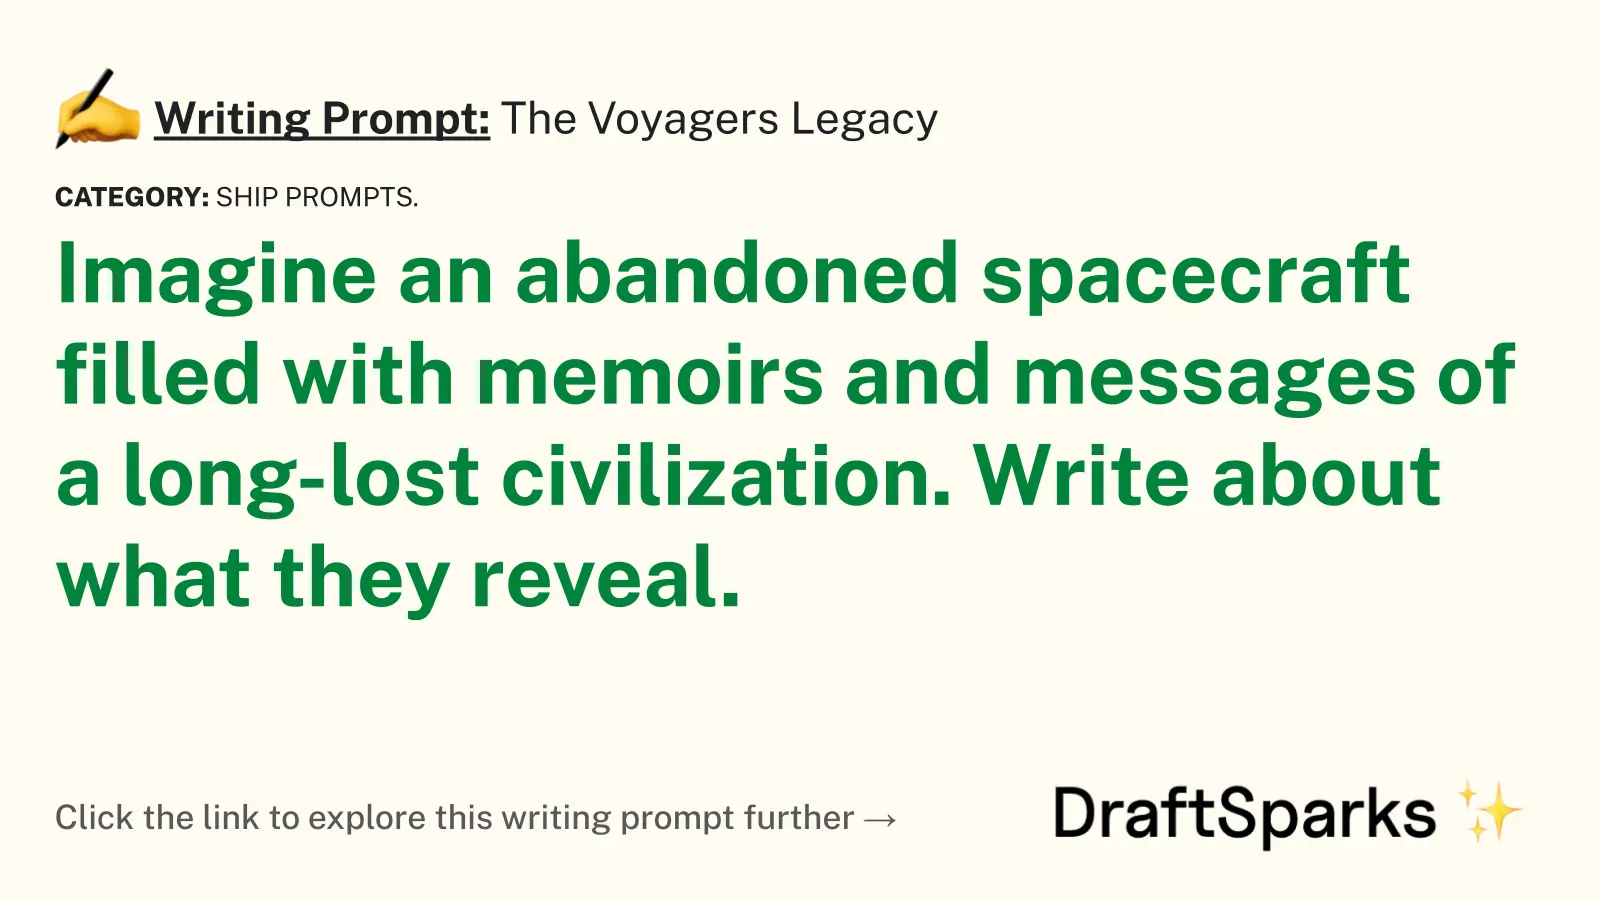 The Voyagers Legacy